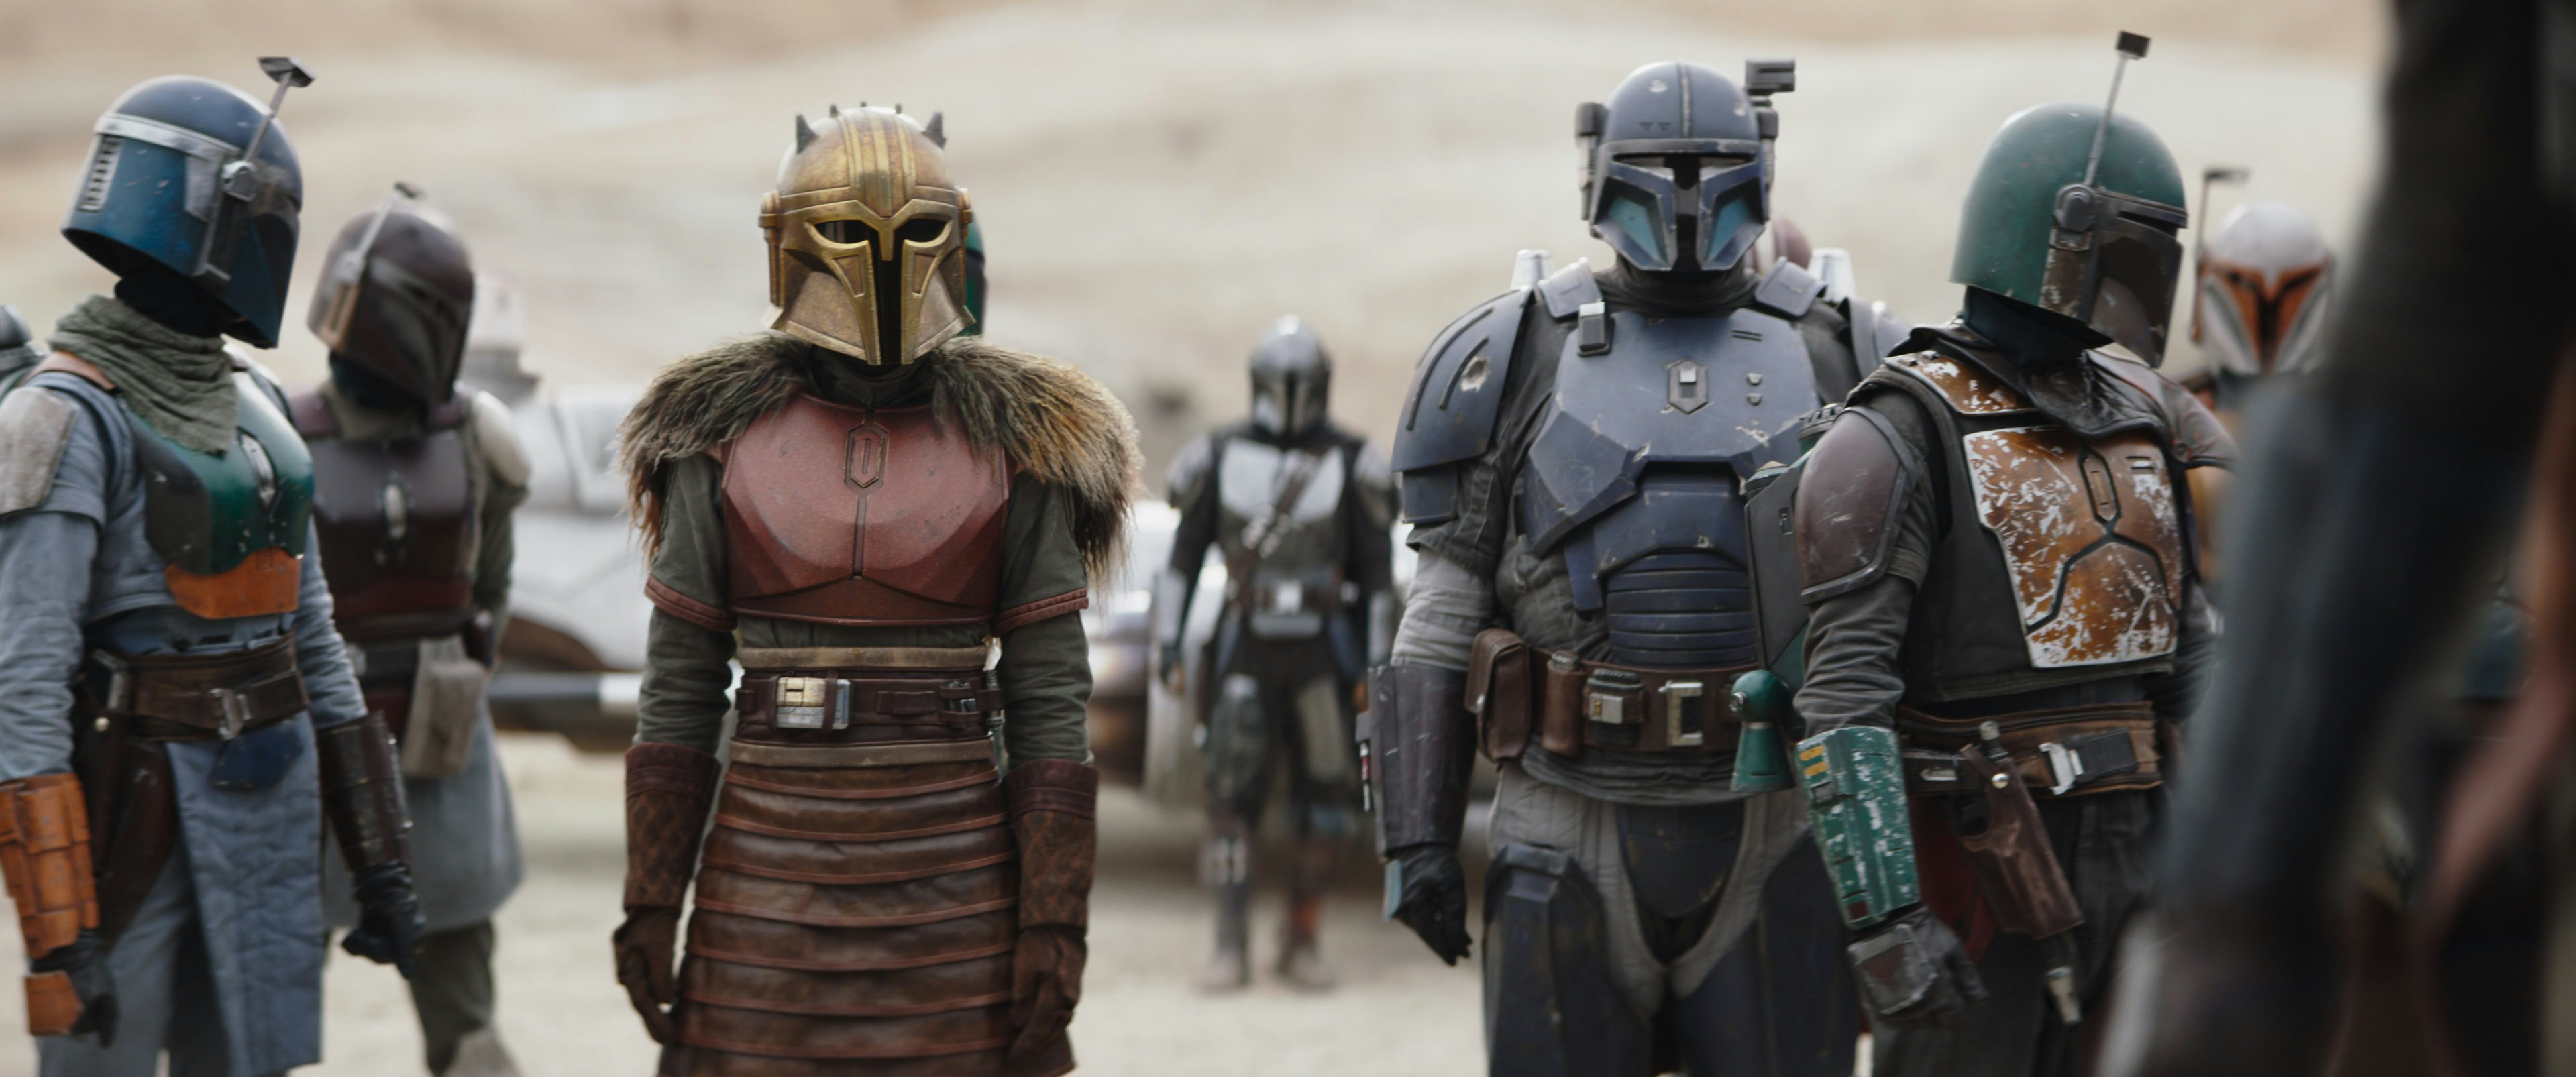 Who Are The Spies? 'Mandalorian's Strangest Mystery Confirms a